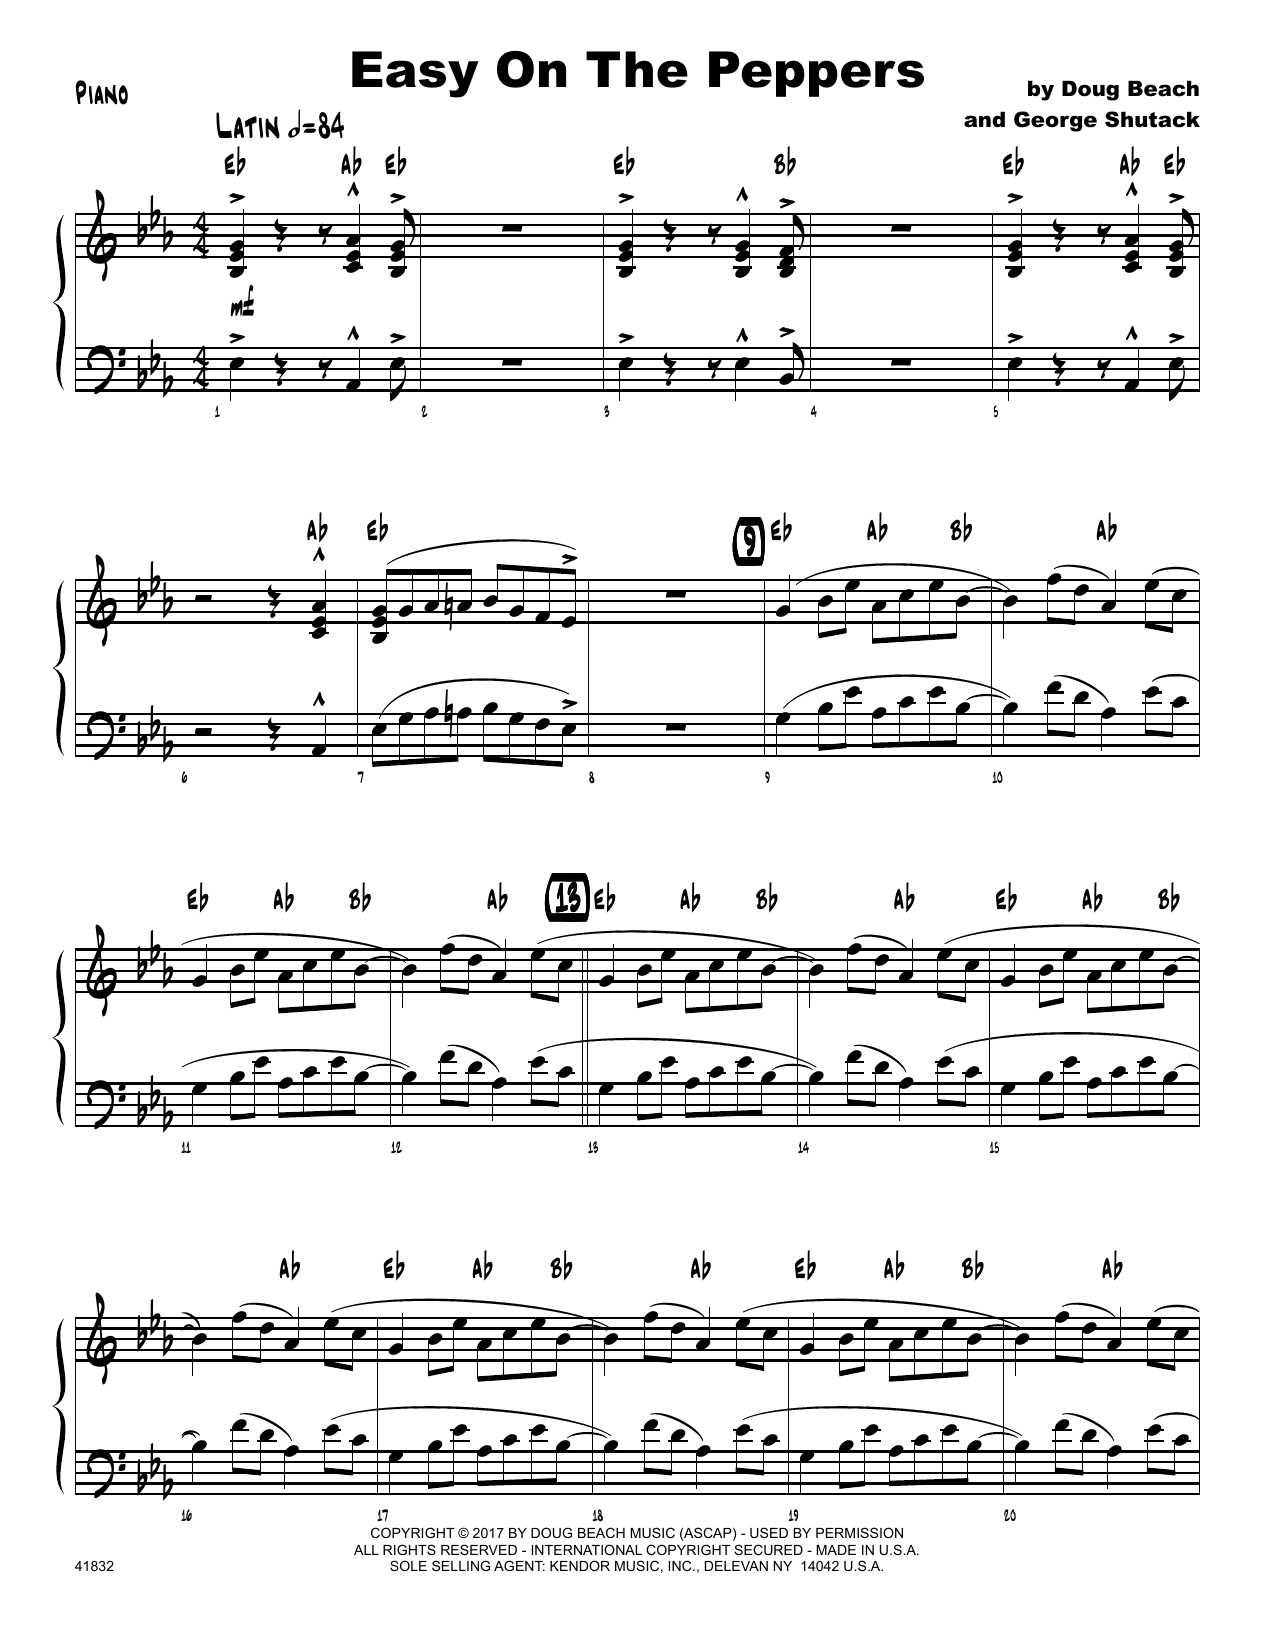 Download Doug Beach & George Shutack Easy On The Peppers - Piano Sheet Music